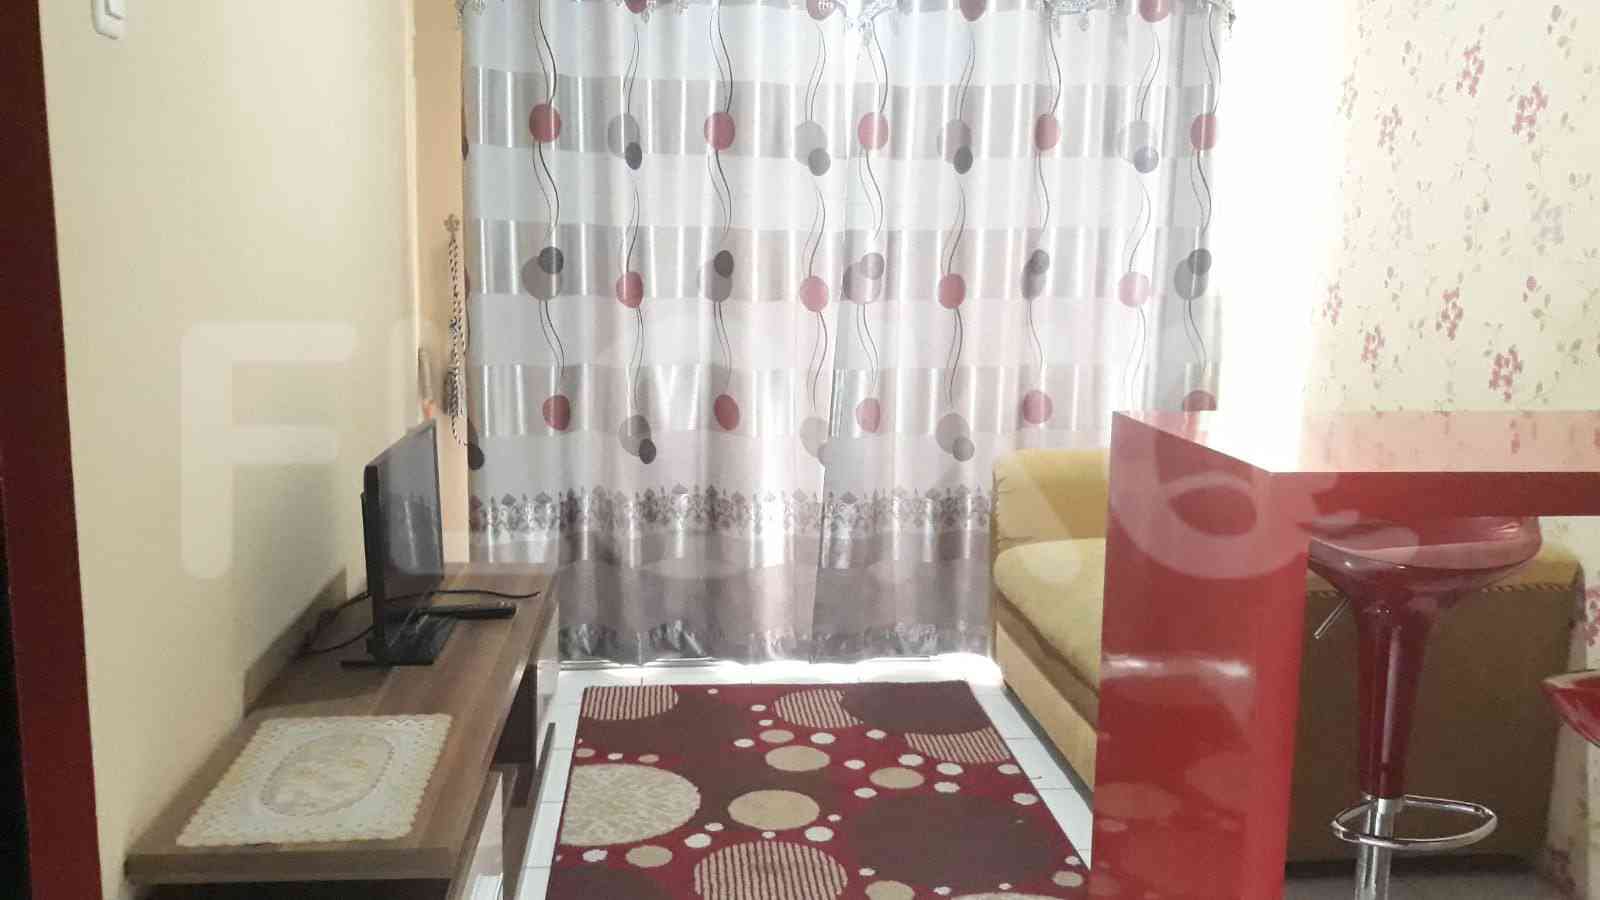 2 Bedroom on 18th Floor for Rent in Sentra Timur Residence - fca2d8 4